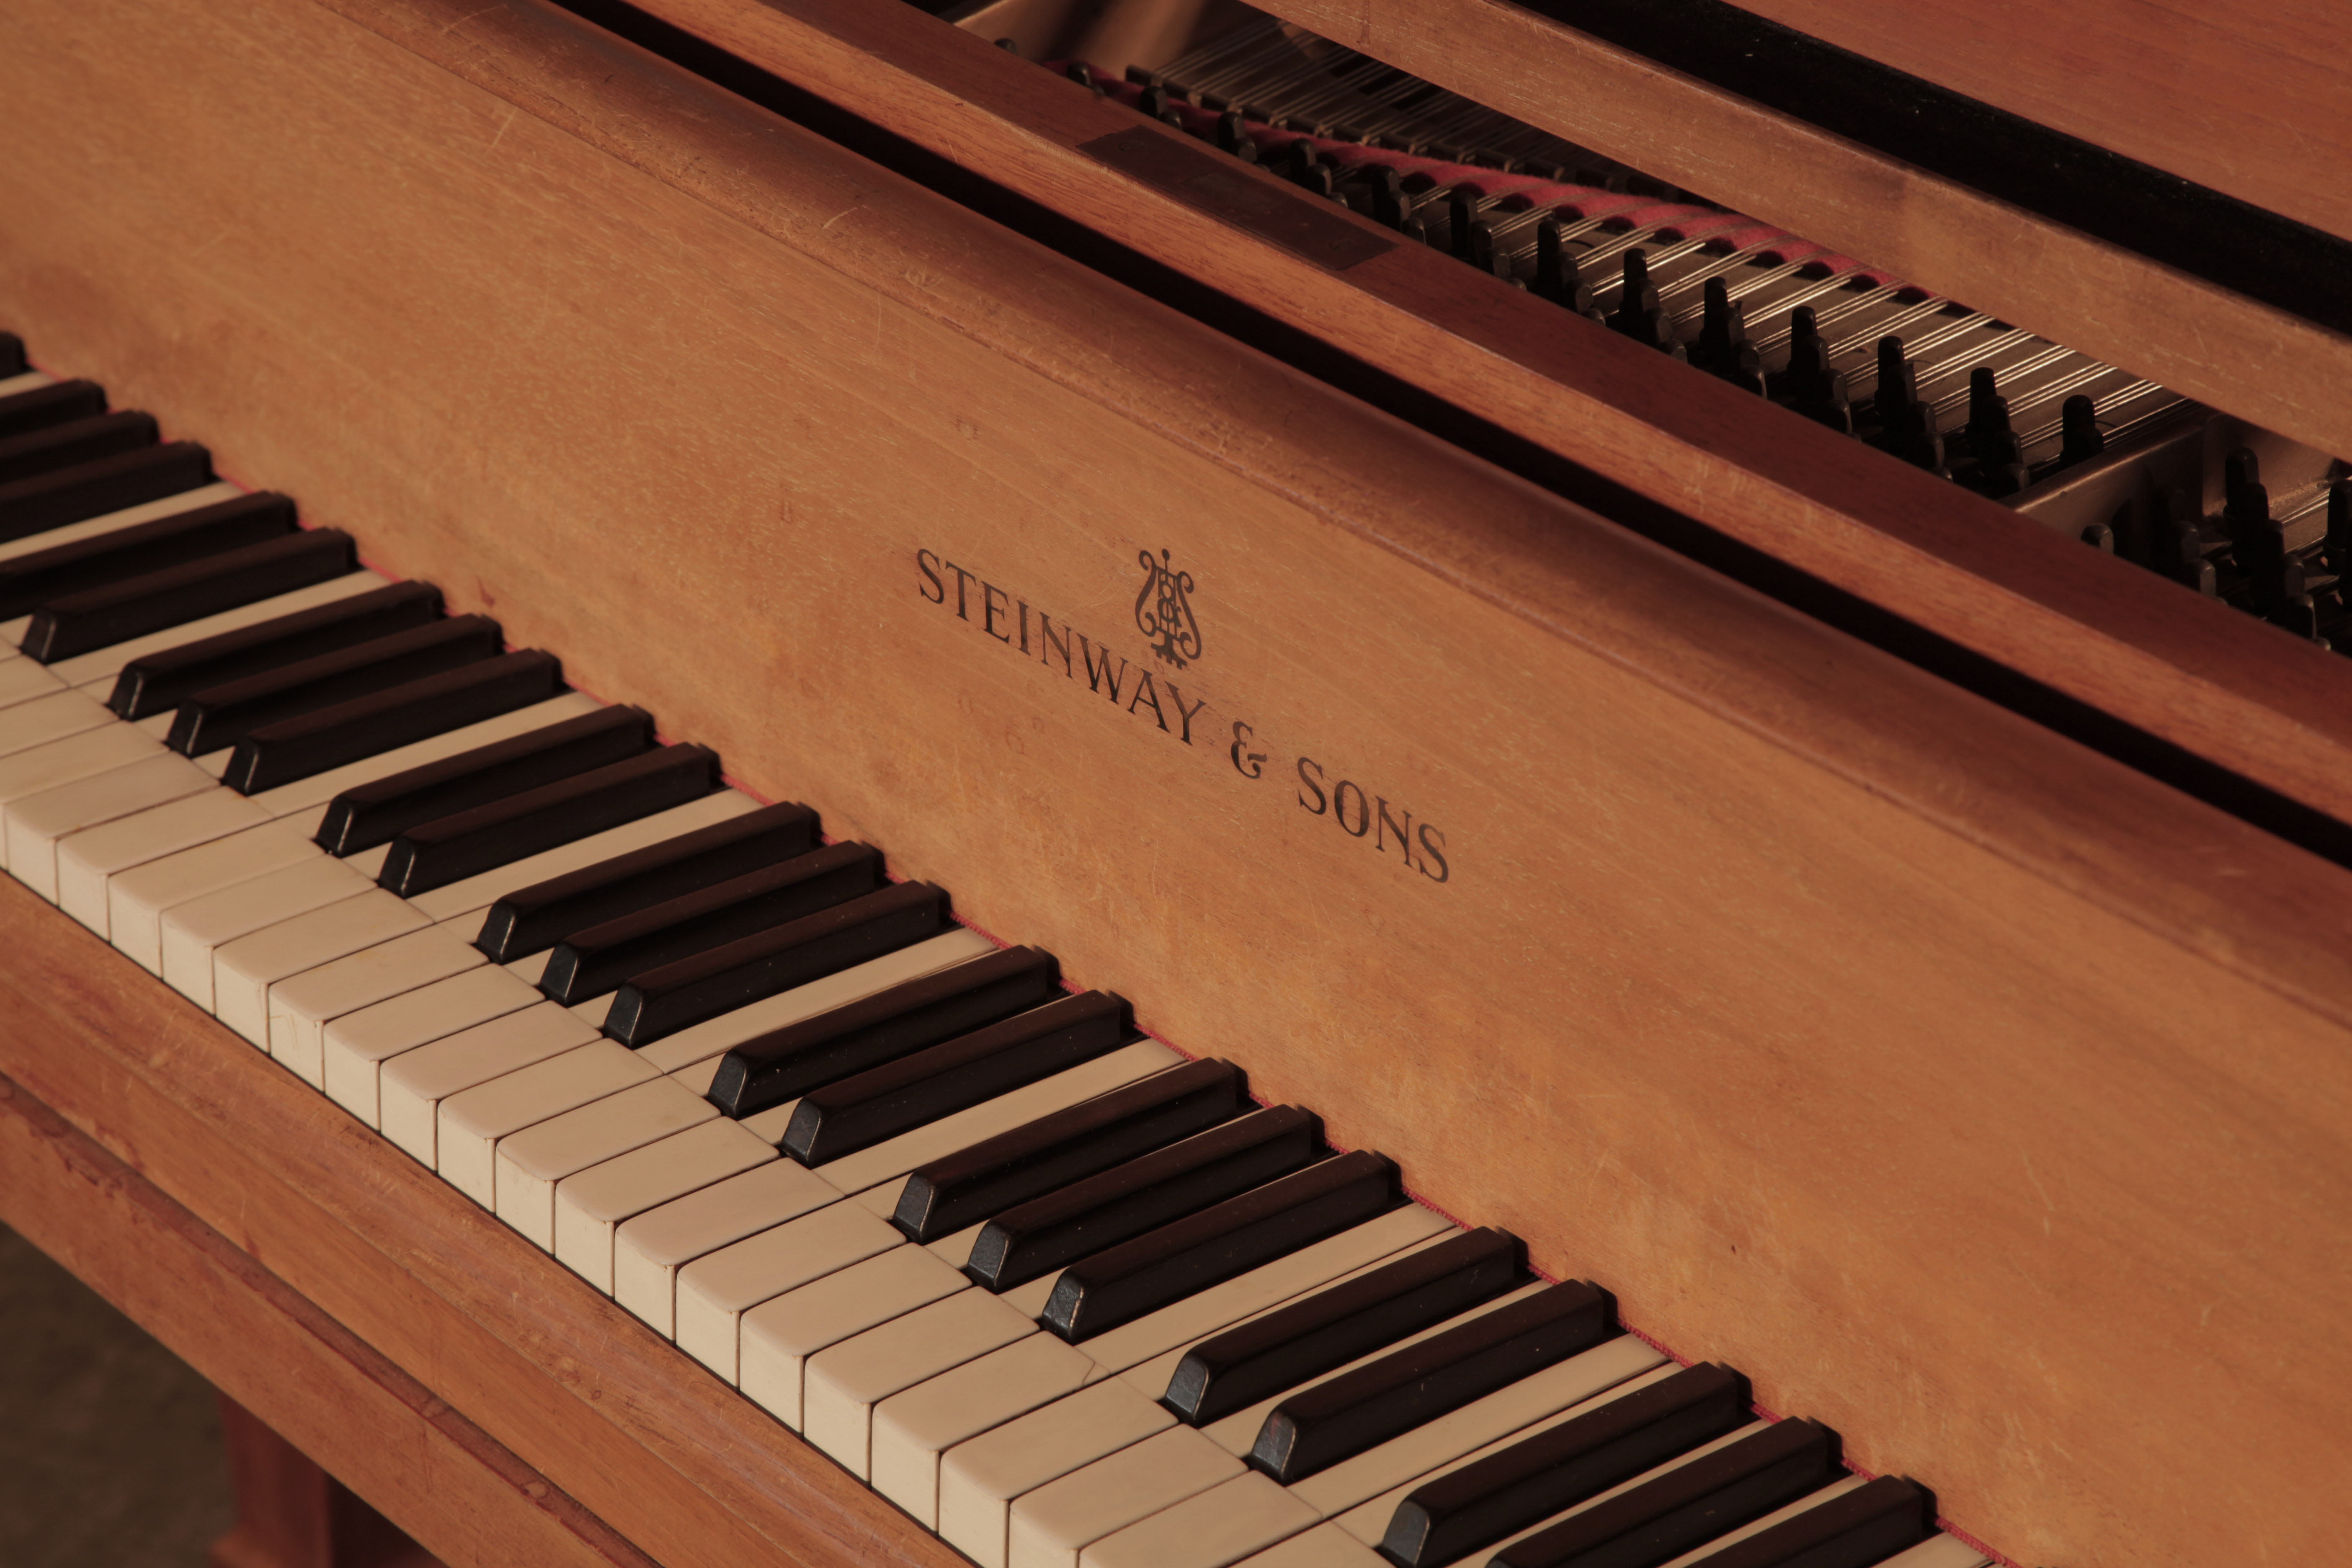 Steinway manufacturer's name inlaid on fall We are looking for Steinway pianos any age or condition.